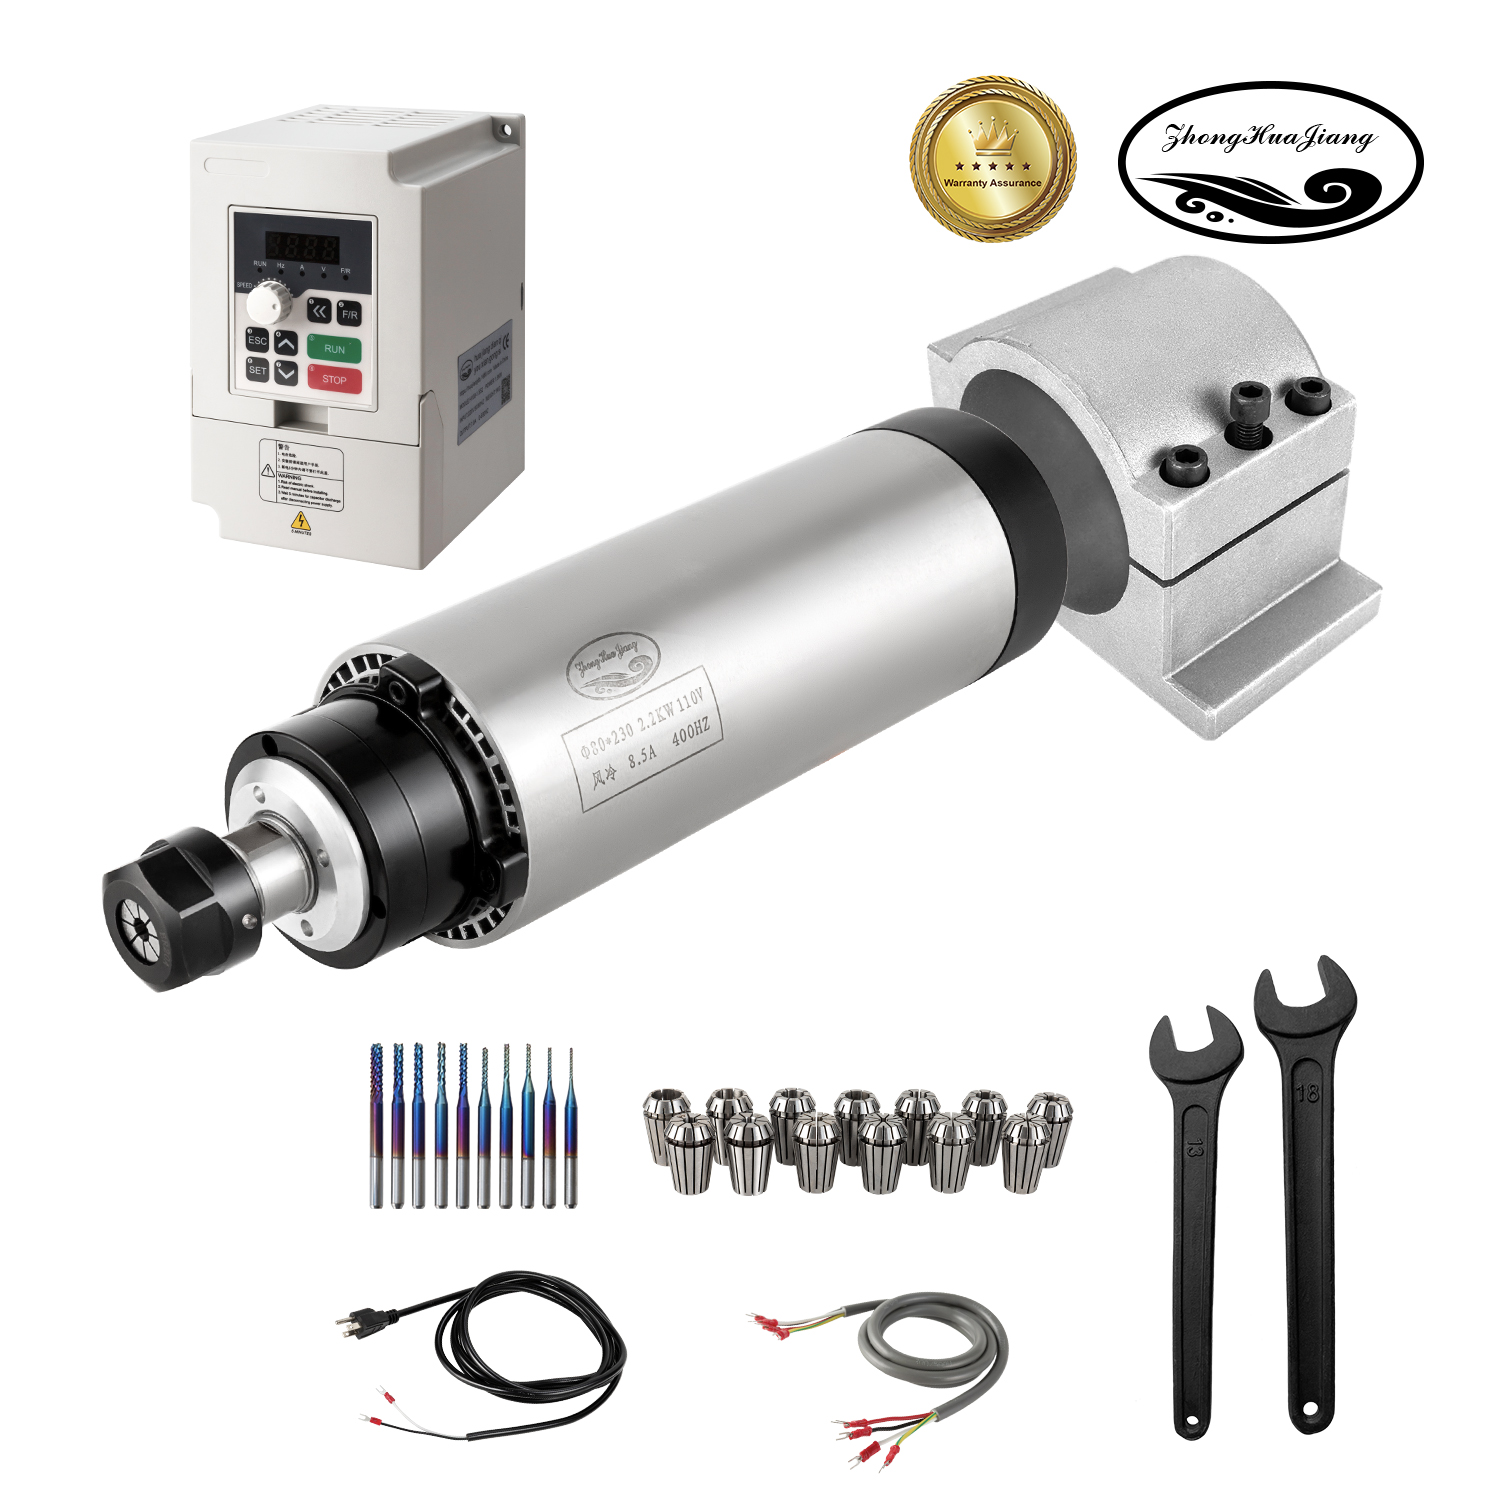 CNC Spindle Motor Kits, 110V 2.2KW Air Cooled Spindle Motor+110V 2.2KW VFD+Φ80mm Clamp Mount + ER20 Collet kit+ Drill bits+ wire+ wrenches for CNC Router machine